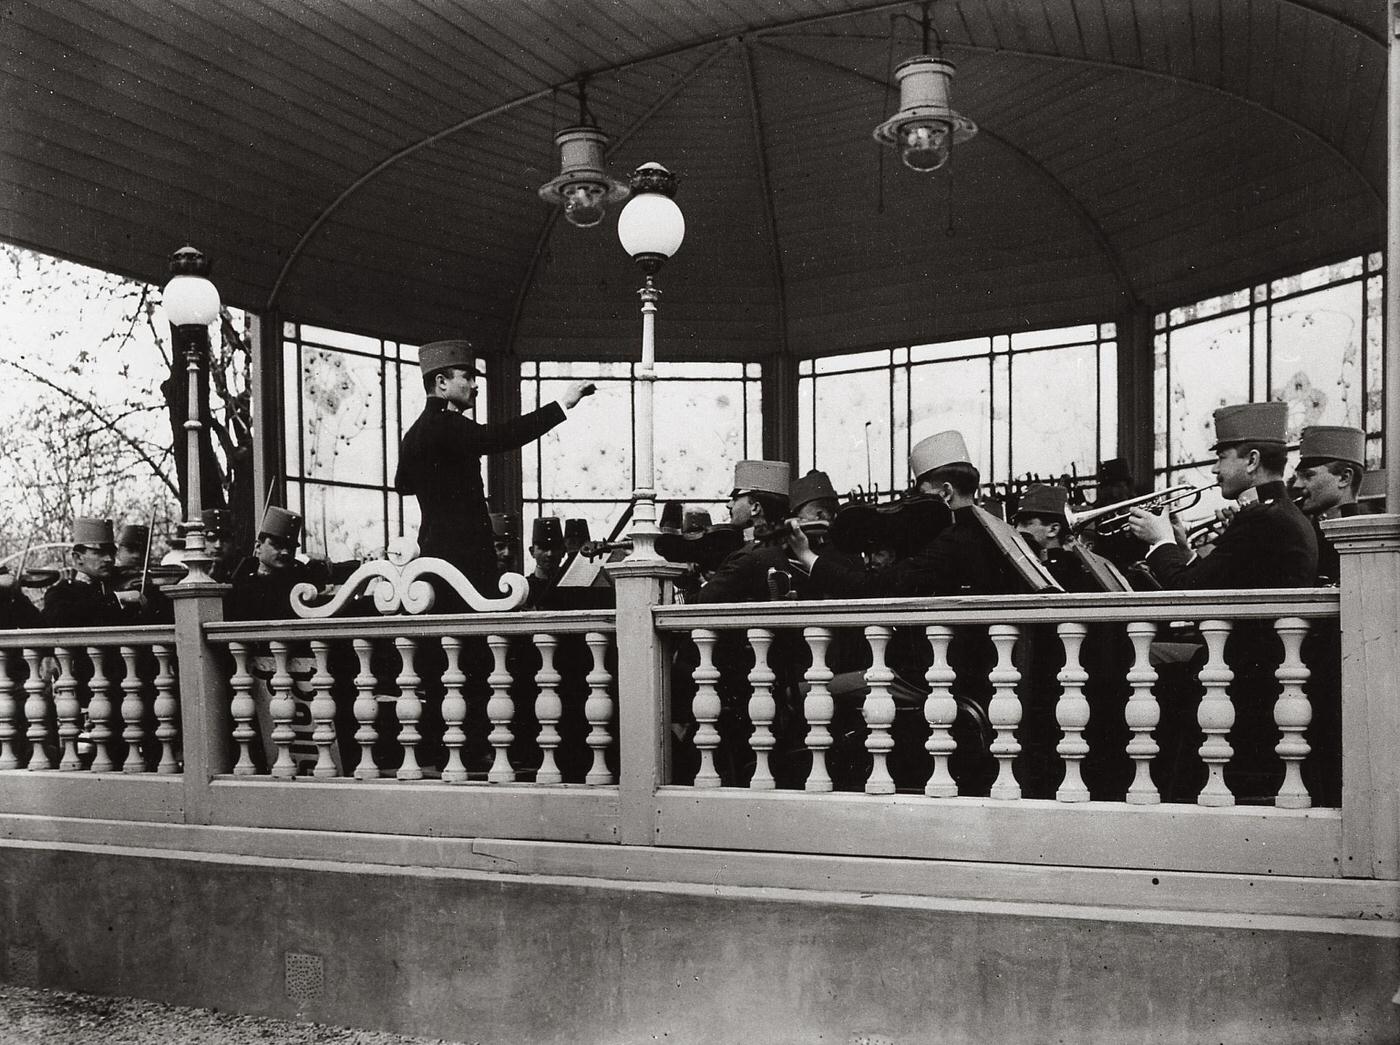 Military band in the Viennese Prater (amusement park), Around 1900s